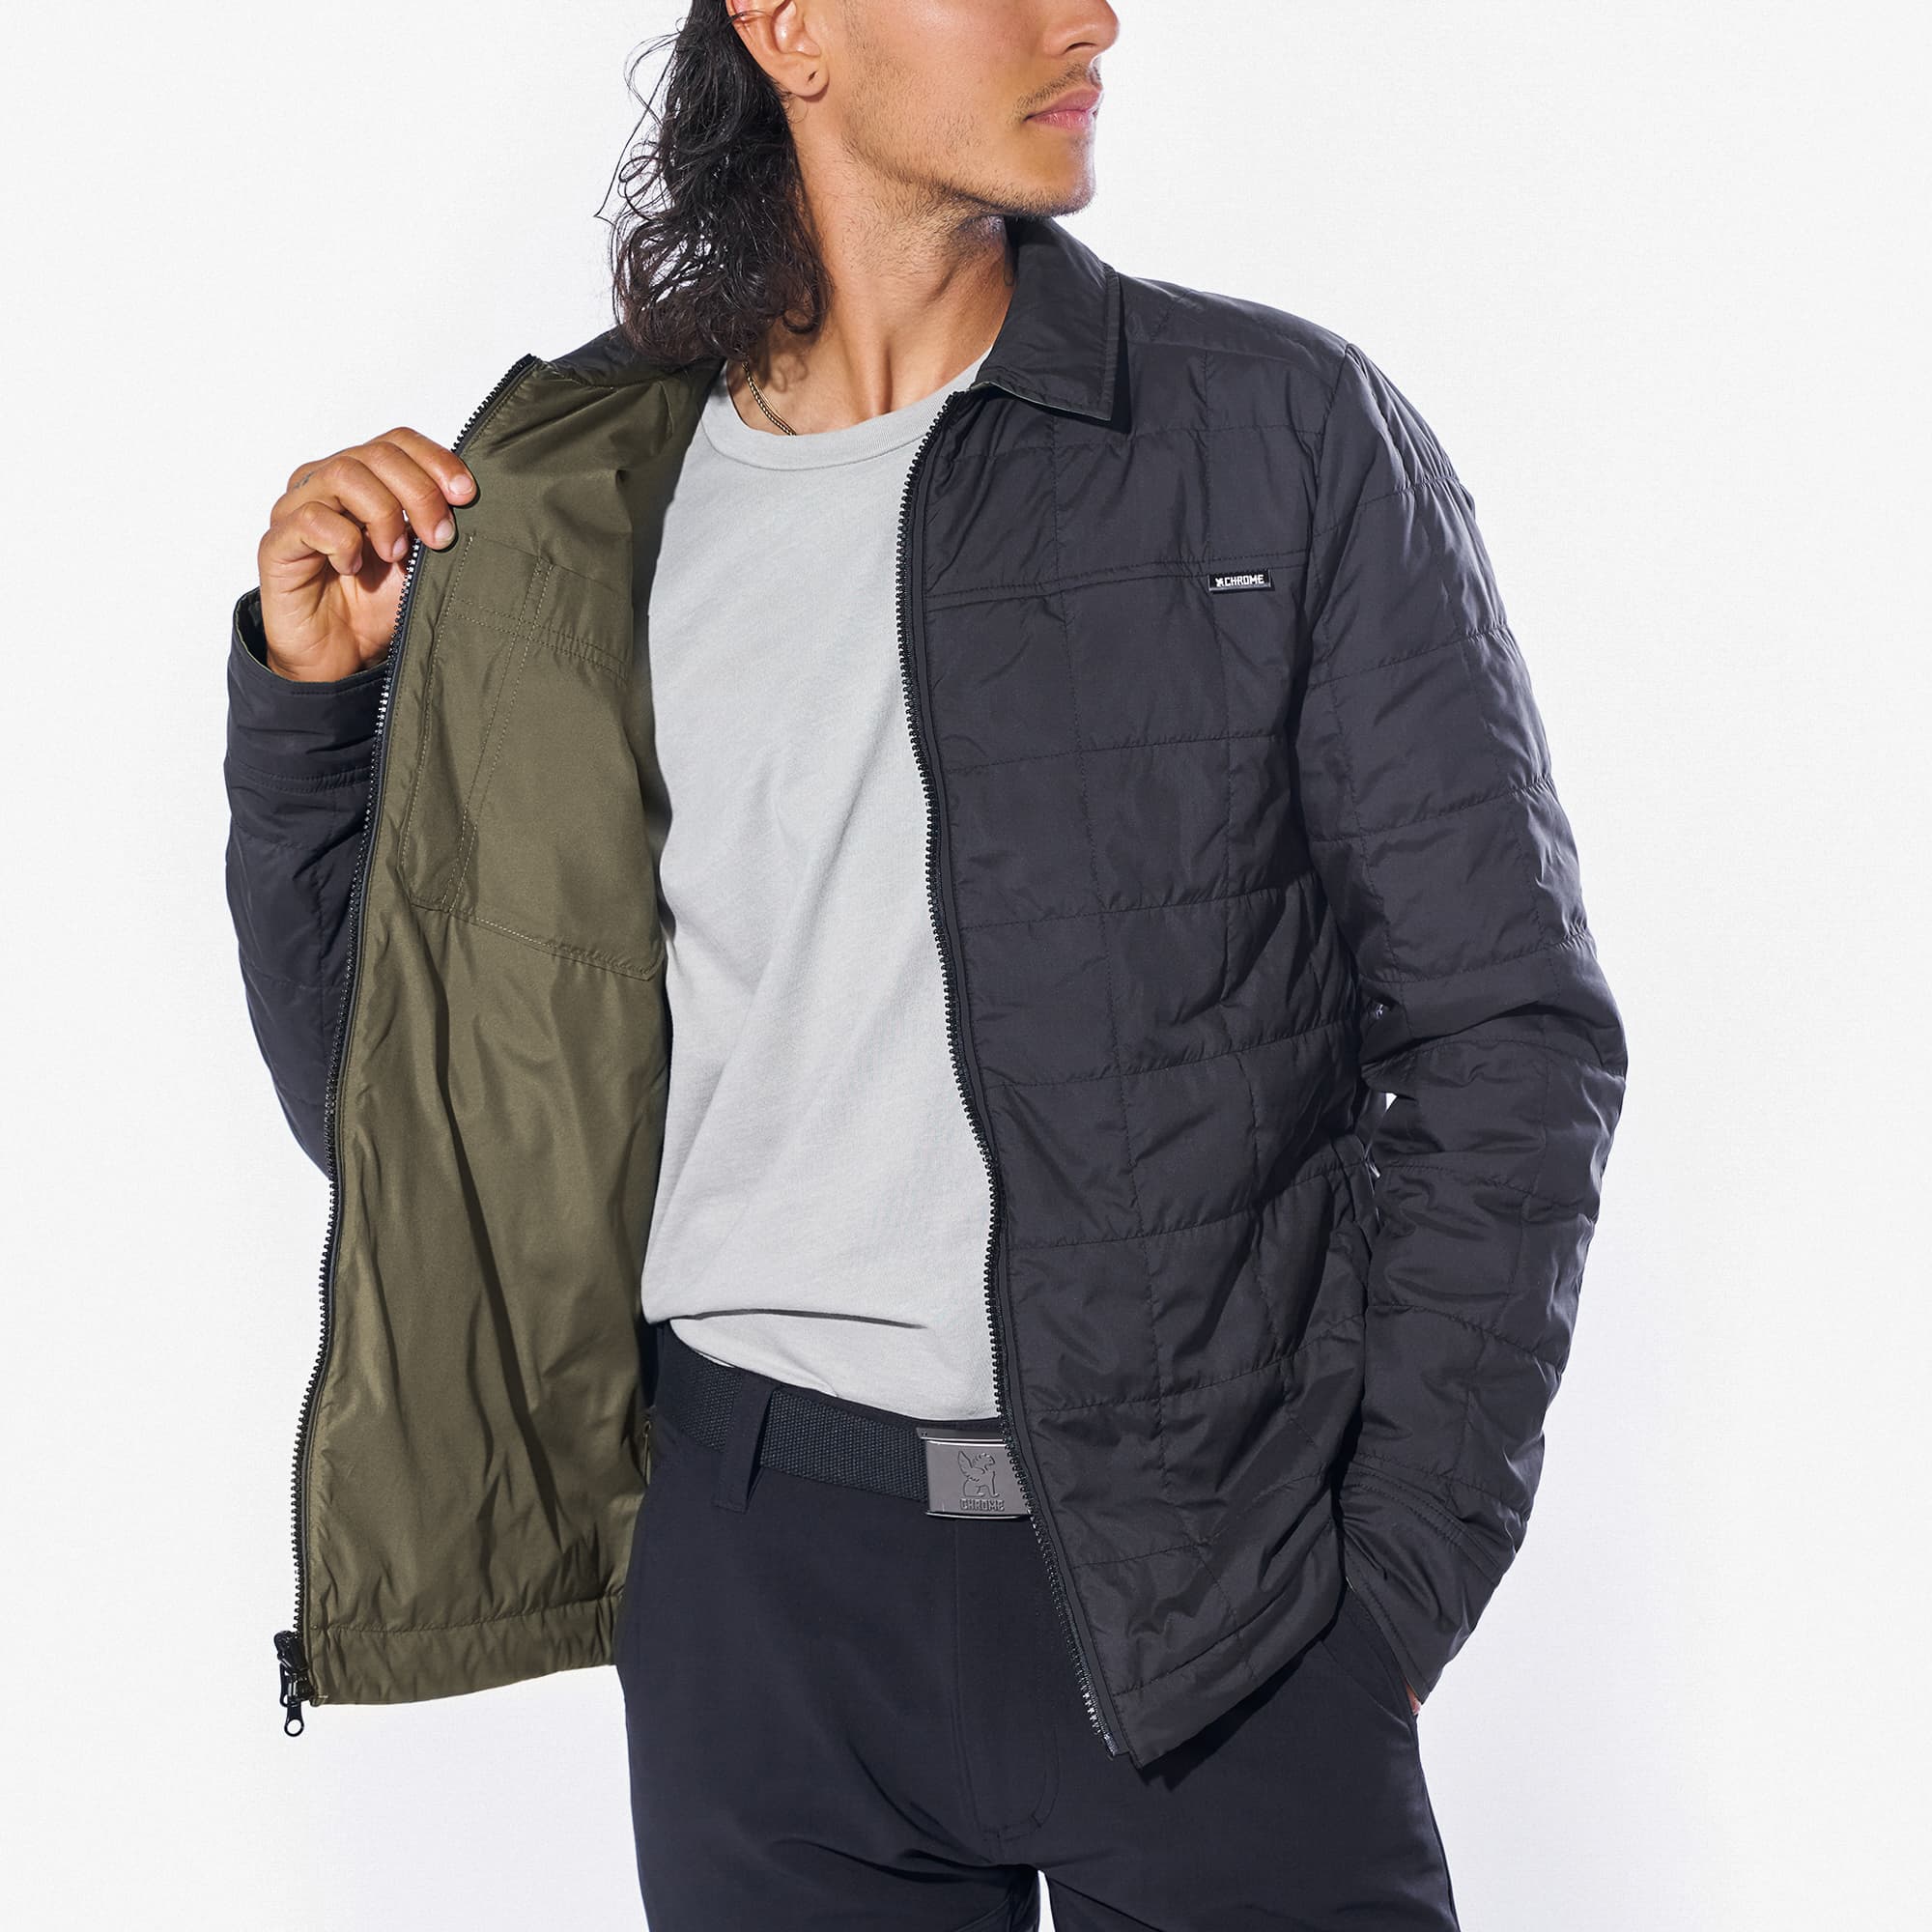 Two way zip Shirt Jacket in black with green on a man holding the side open